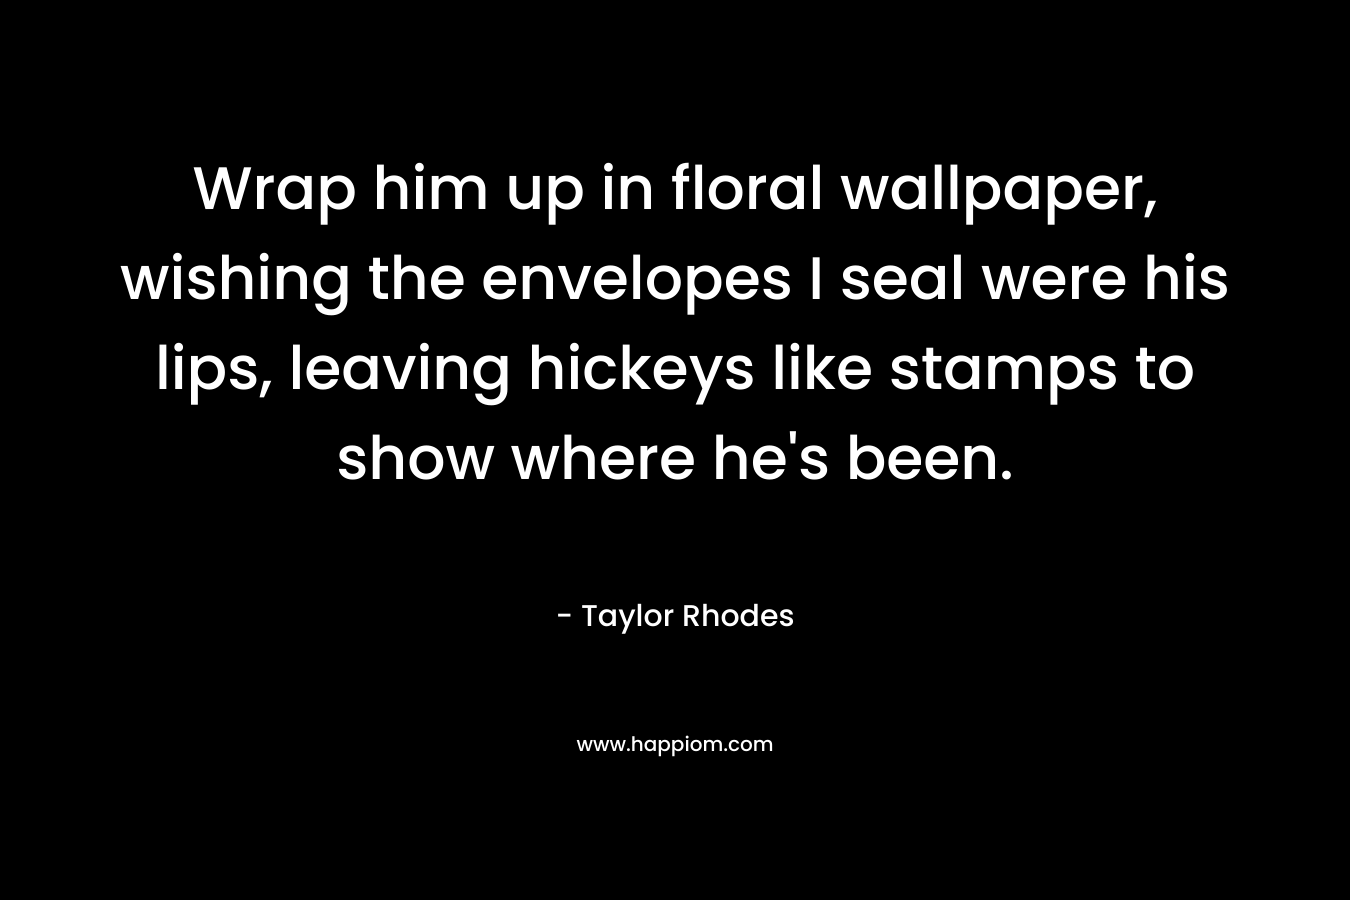 Wrap him up in floral wallpaper, wishing the envelopes I seal were his lips, leaving hickeys like stamps to show where he's been.